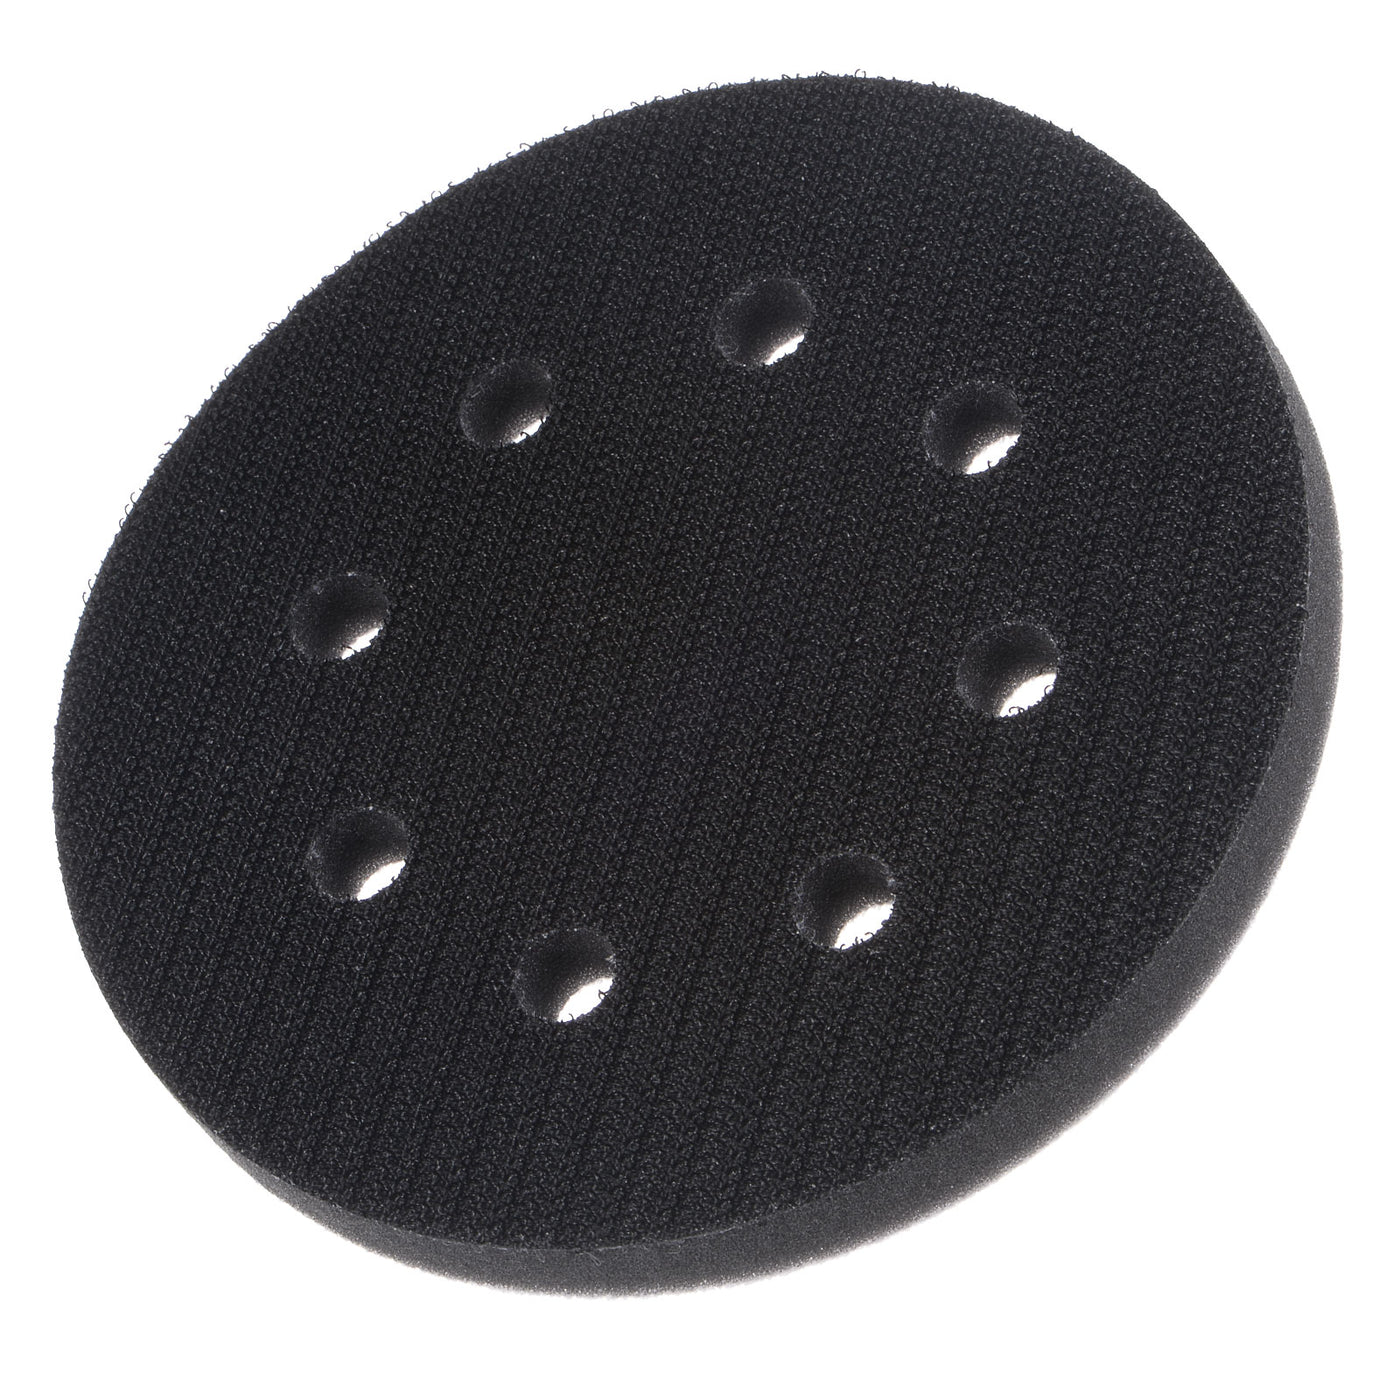 uxcell Uxcell 5 Inch 8 Holes Sponge Interface Pad Soft Density Hook and Loop Cushion Buffer Backing Pad for Electric Sander